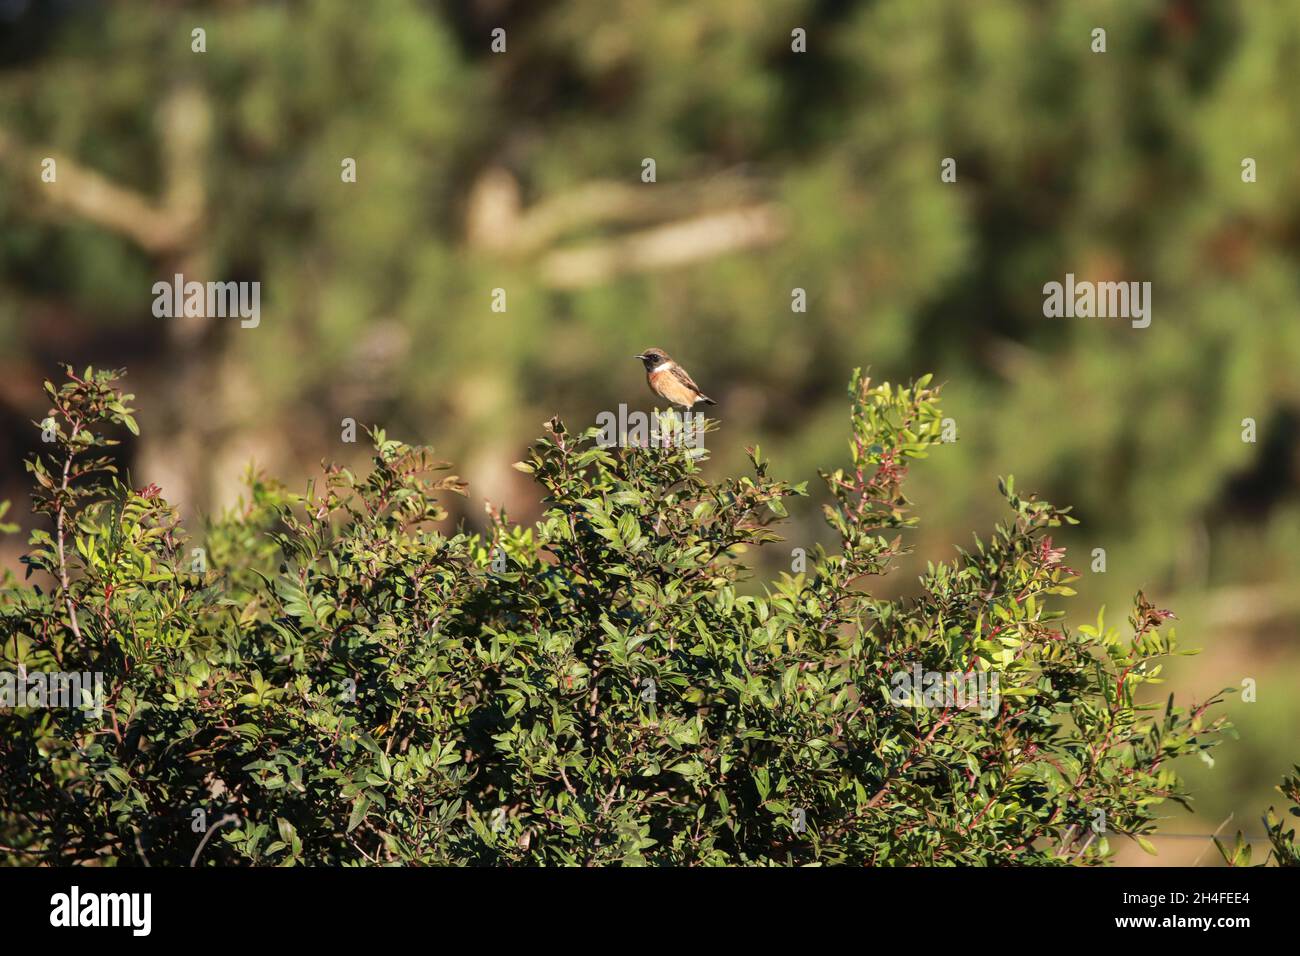 European Stonechat on the branch. Wildlife scene from nature Stock Photo